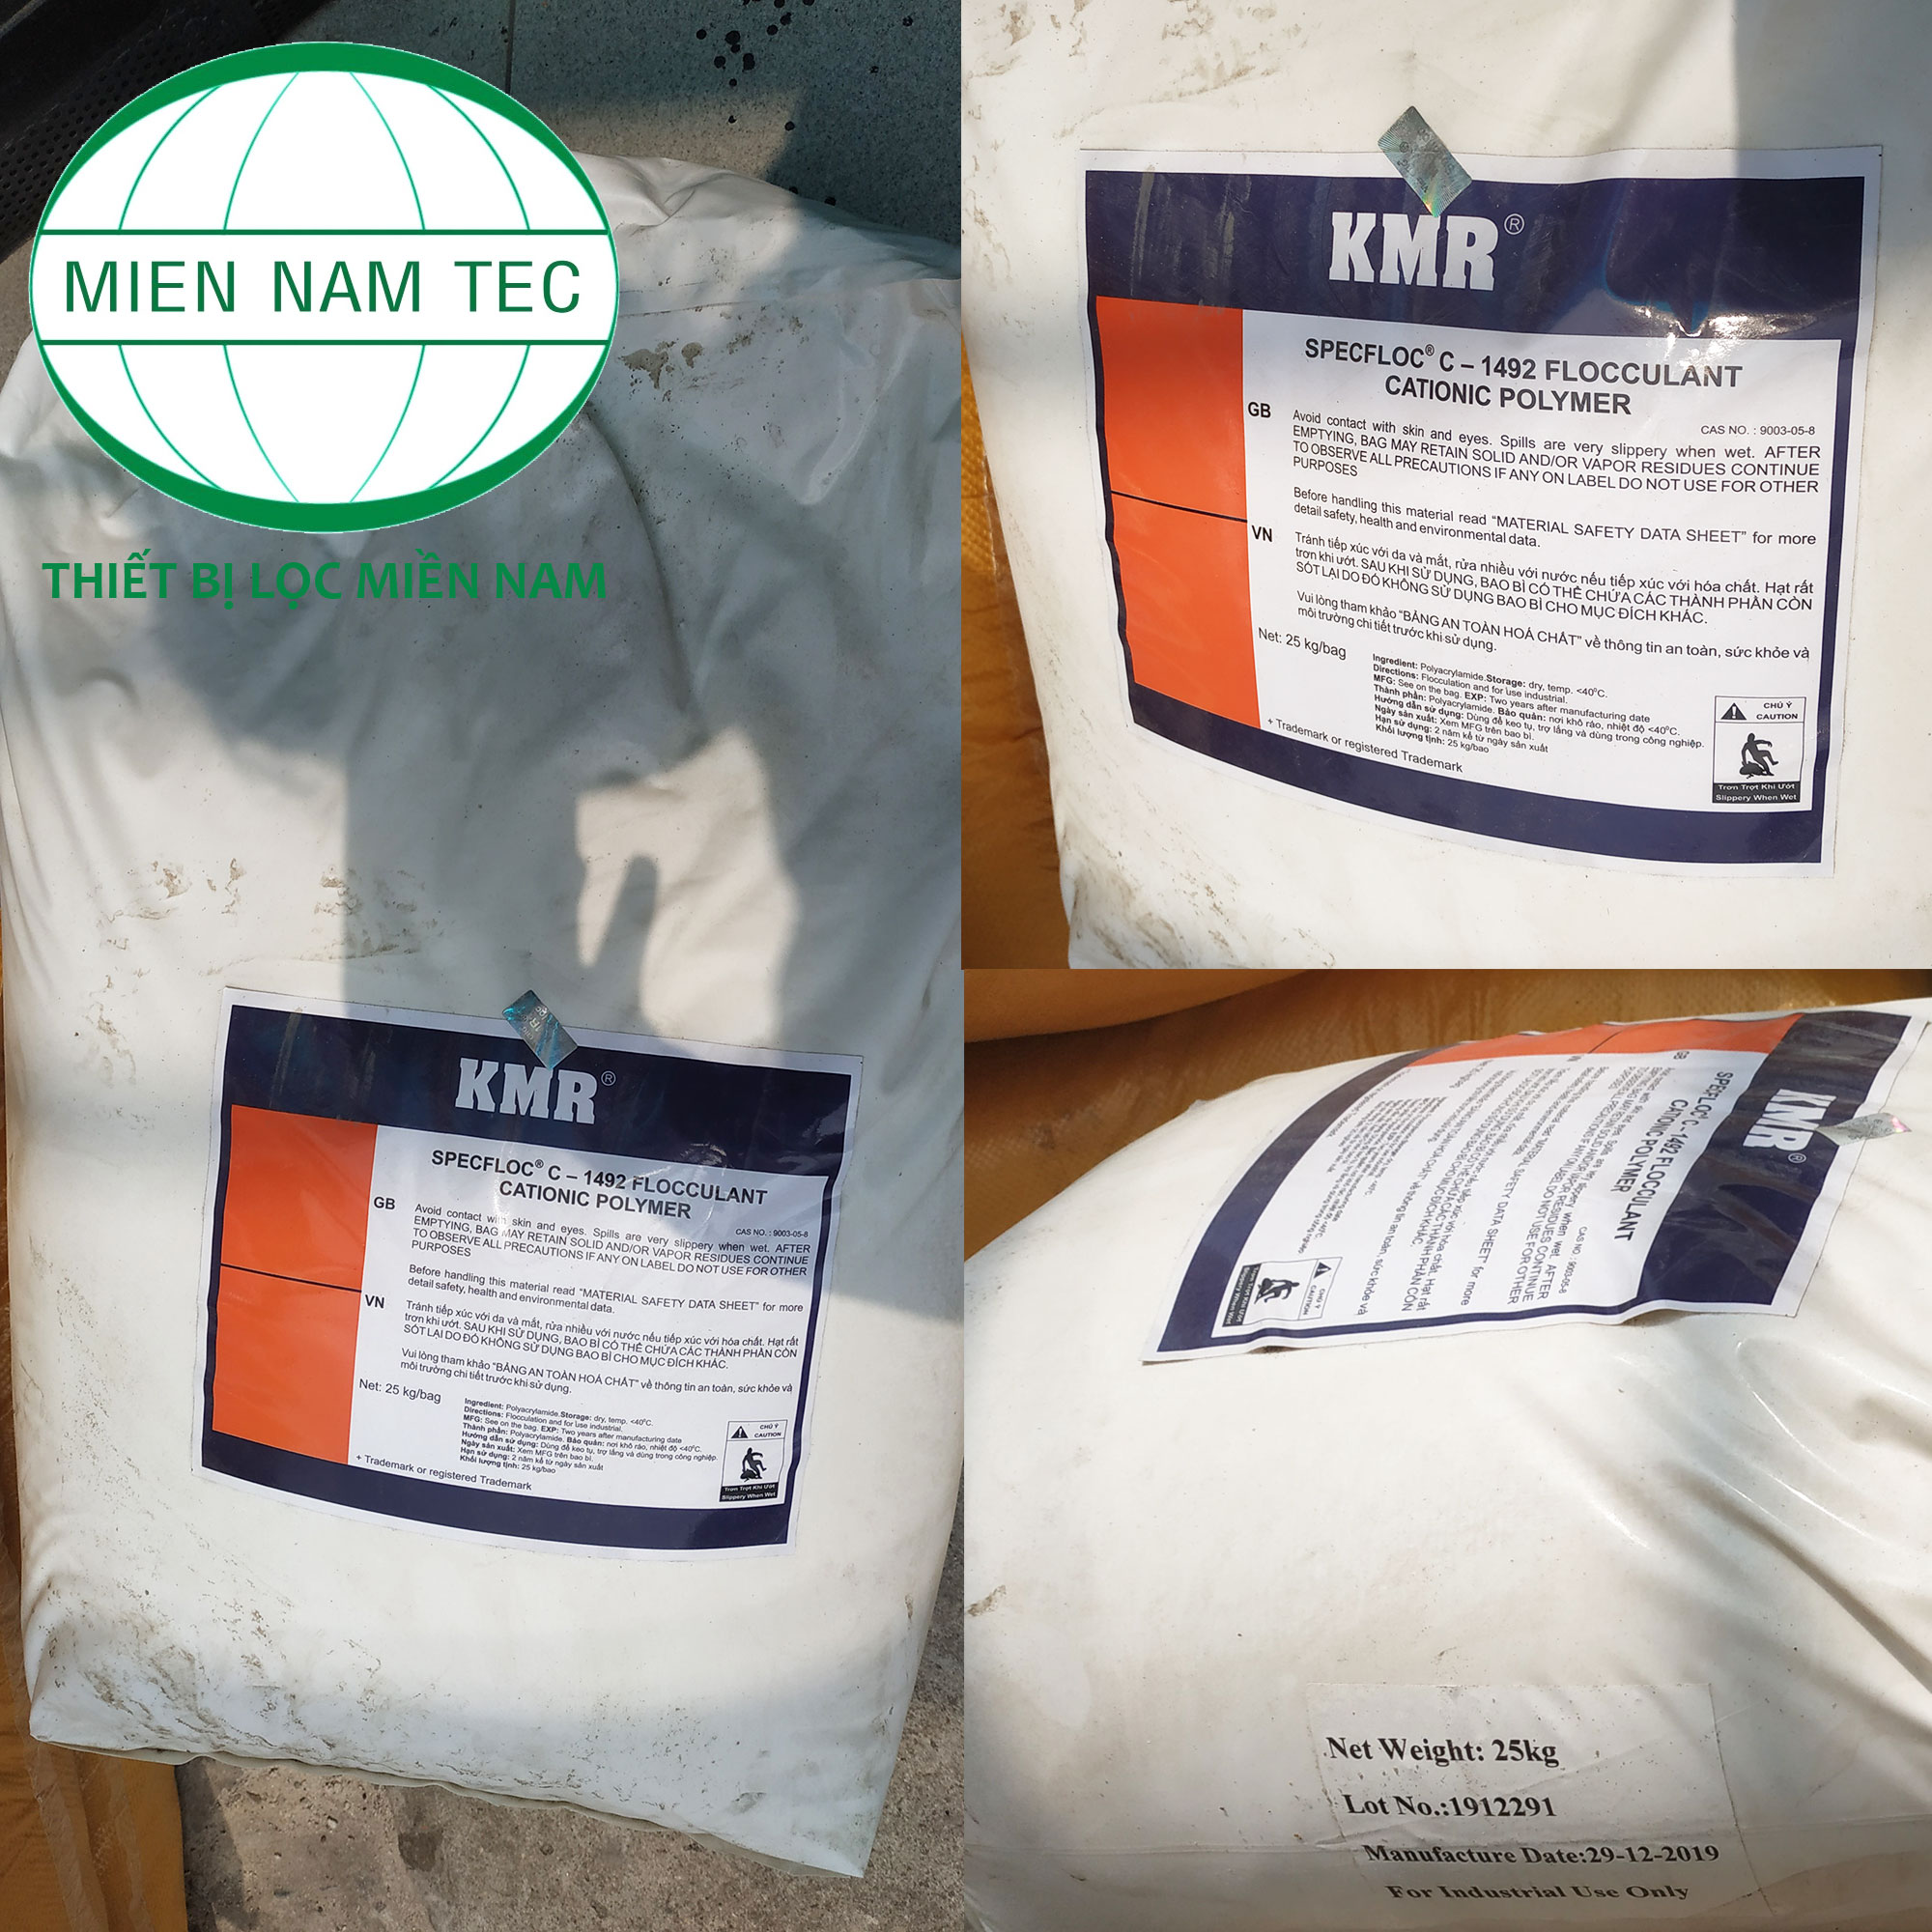 Chất trợ keo polymer cation KMR C-1492